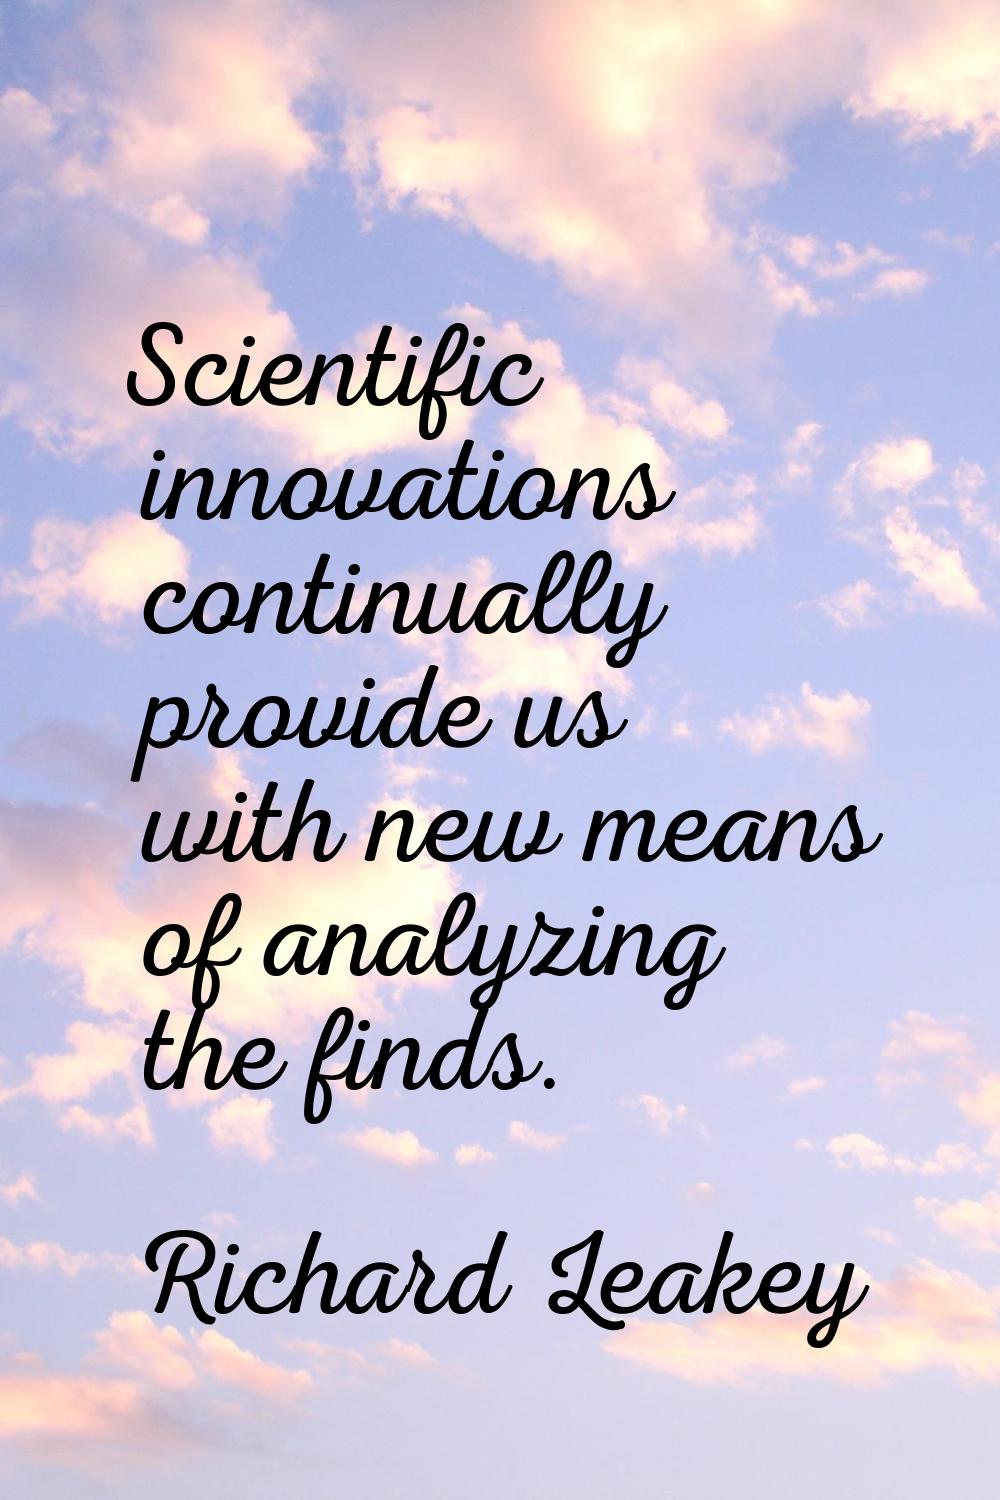 Scientific innovations continually provide us with new means of analyzing the finds.